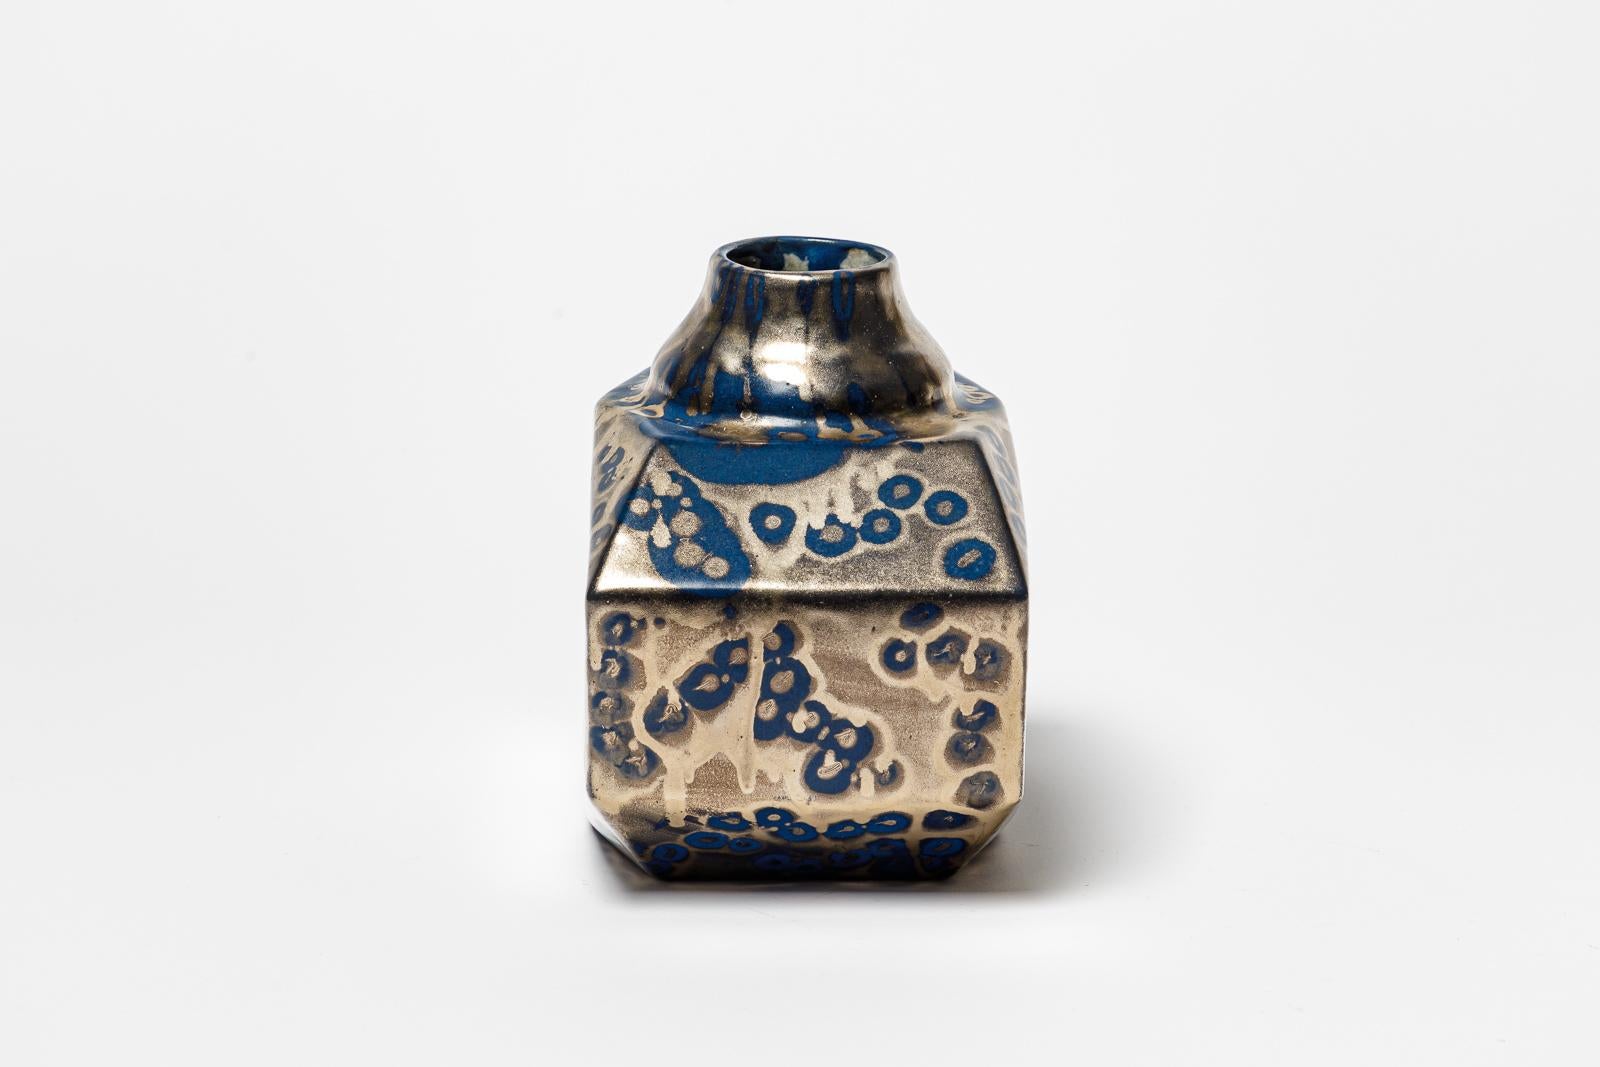 Beaux Arts Blue and gold glazed ceramic vase by Jean Pointu, circa 1930.